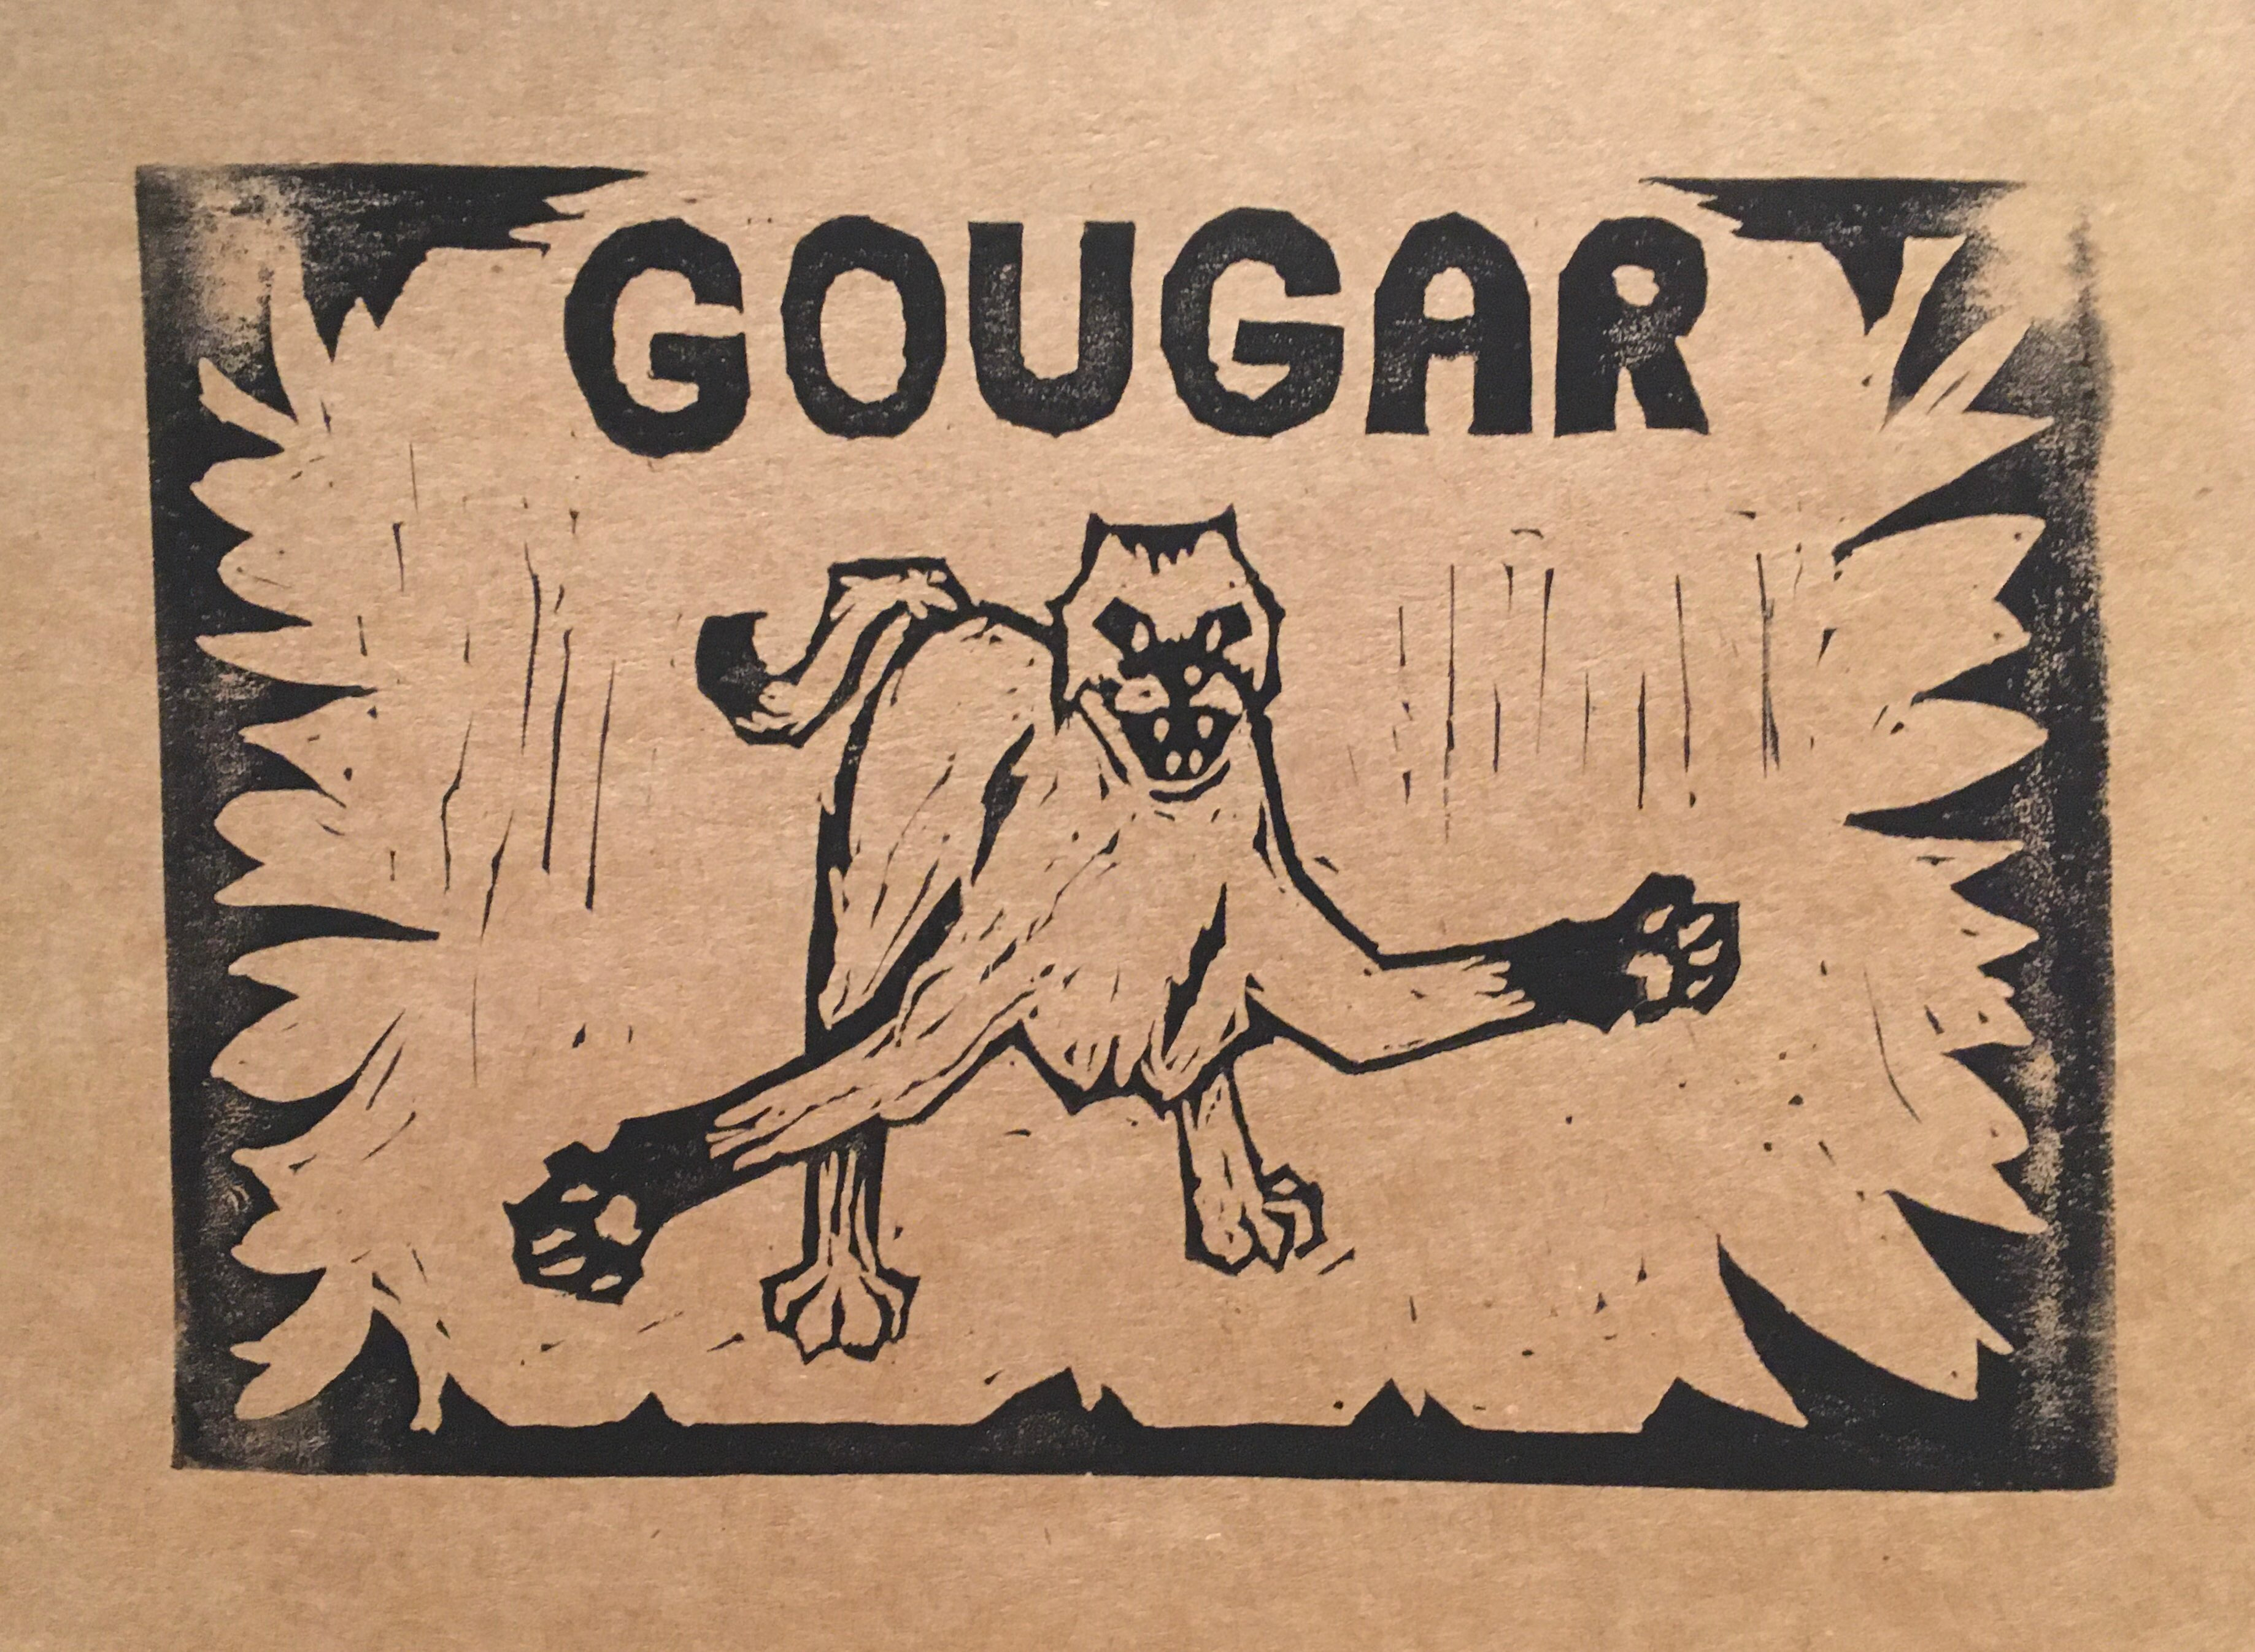 black ink blockprint on brown paper, depicting a cougar with arms outstretched and ears back, lunging forward. a rectangular border wraps around it, with curved spikes resembling fangs or claws reaching towards the middle. the title at the top reads “GOUGAR” in bold letters